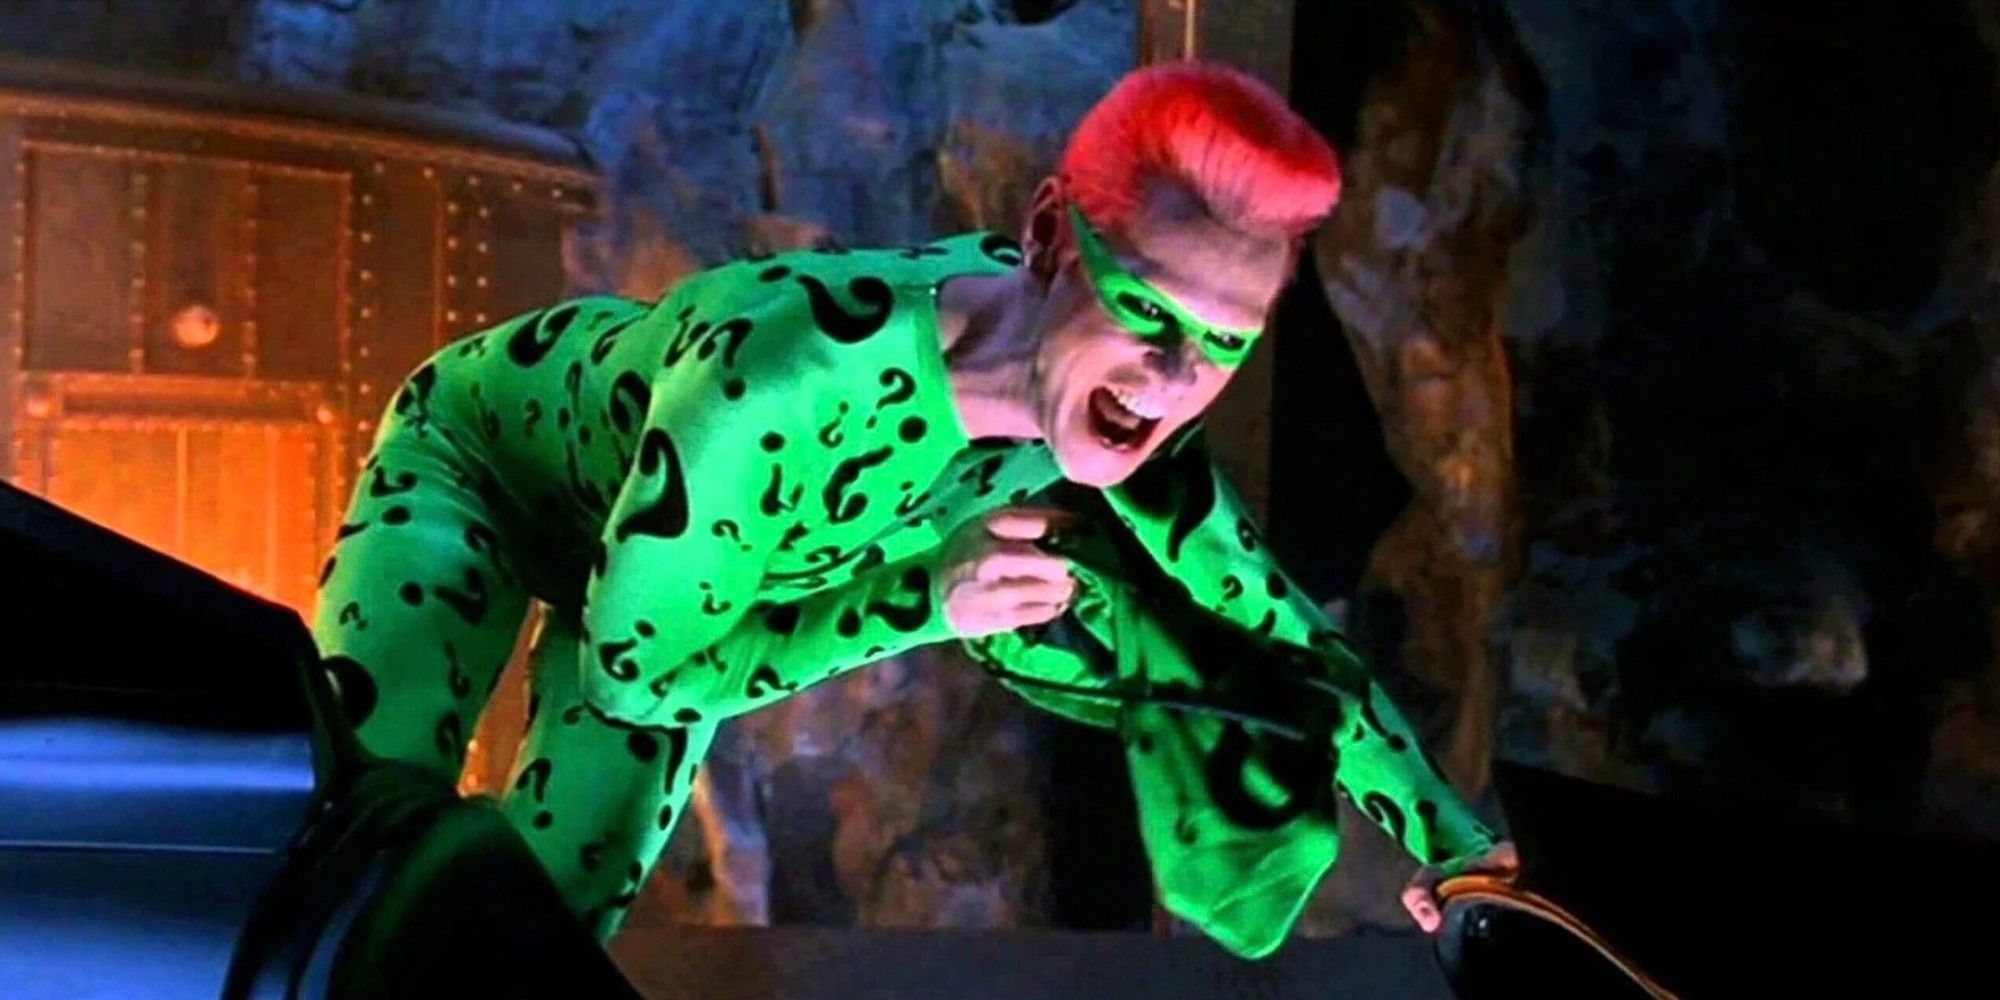 Jim Carrey's Riddler crouched and laughing in his question mark suit in Batman Forever